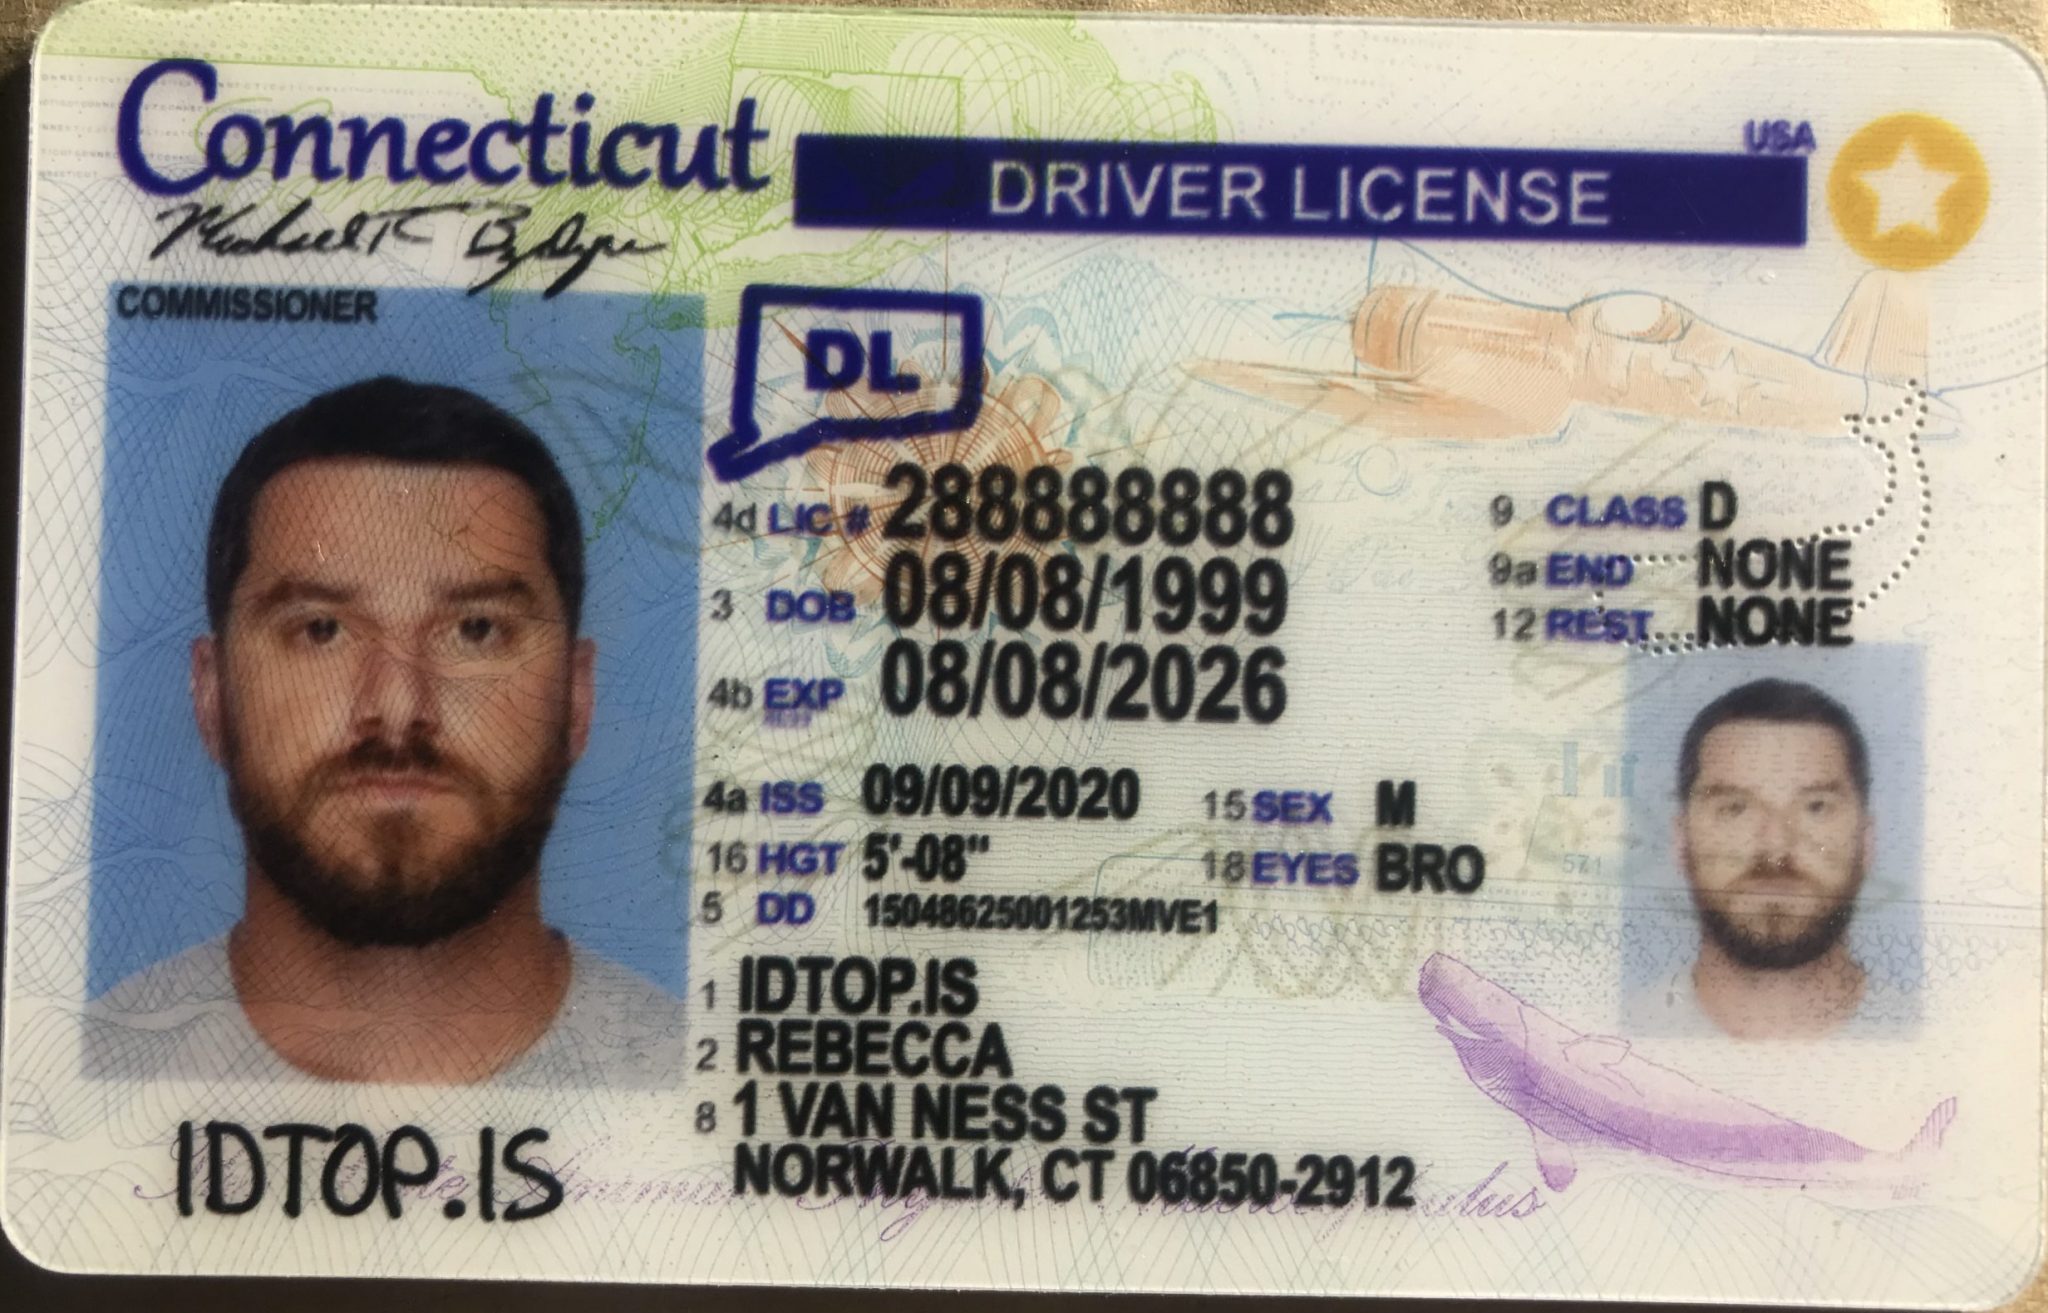 Connecticut Fake ID | Buy Scannable Fake IDs | IDTop